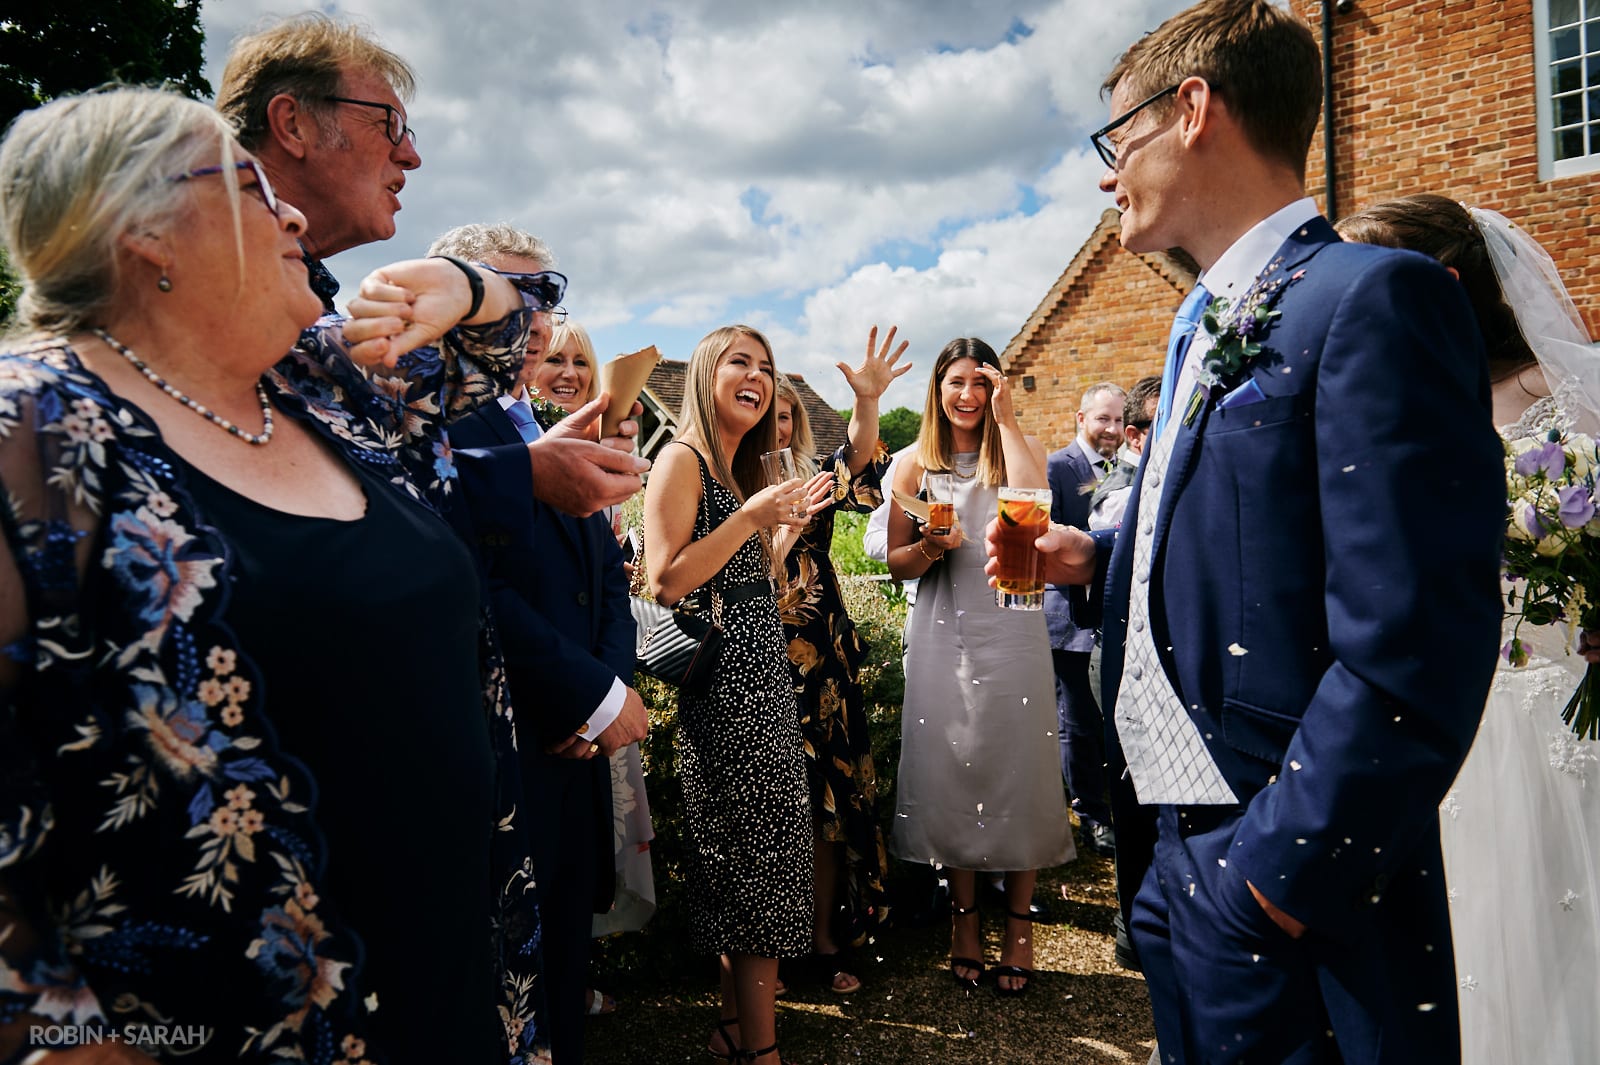 Bride and groom chat to guests as they arrive at wedding reception